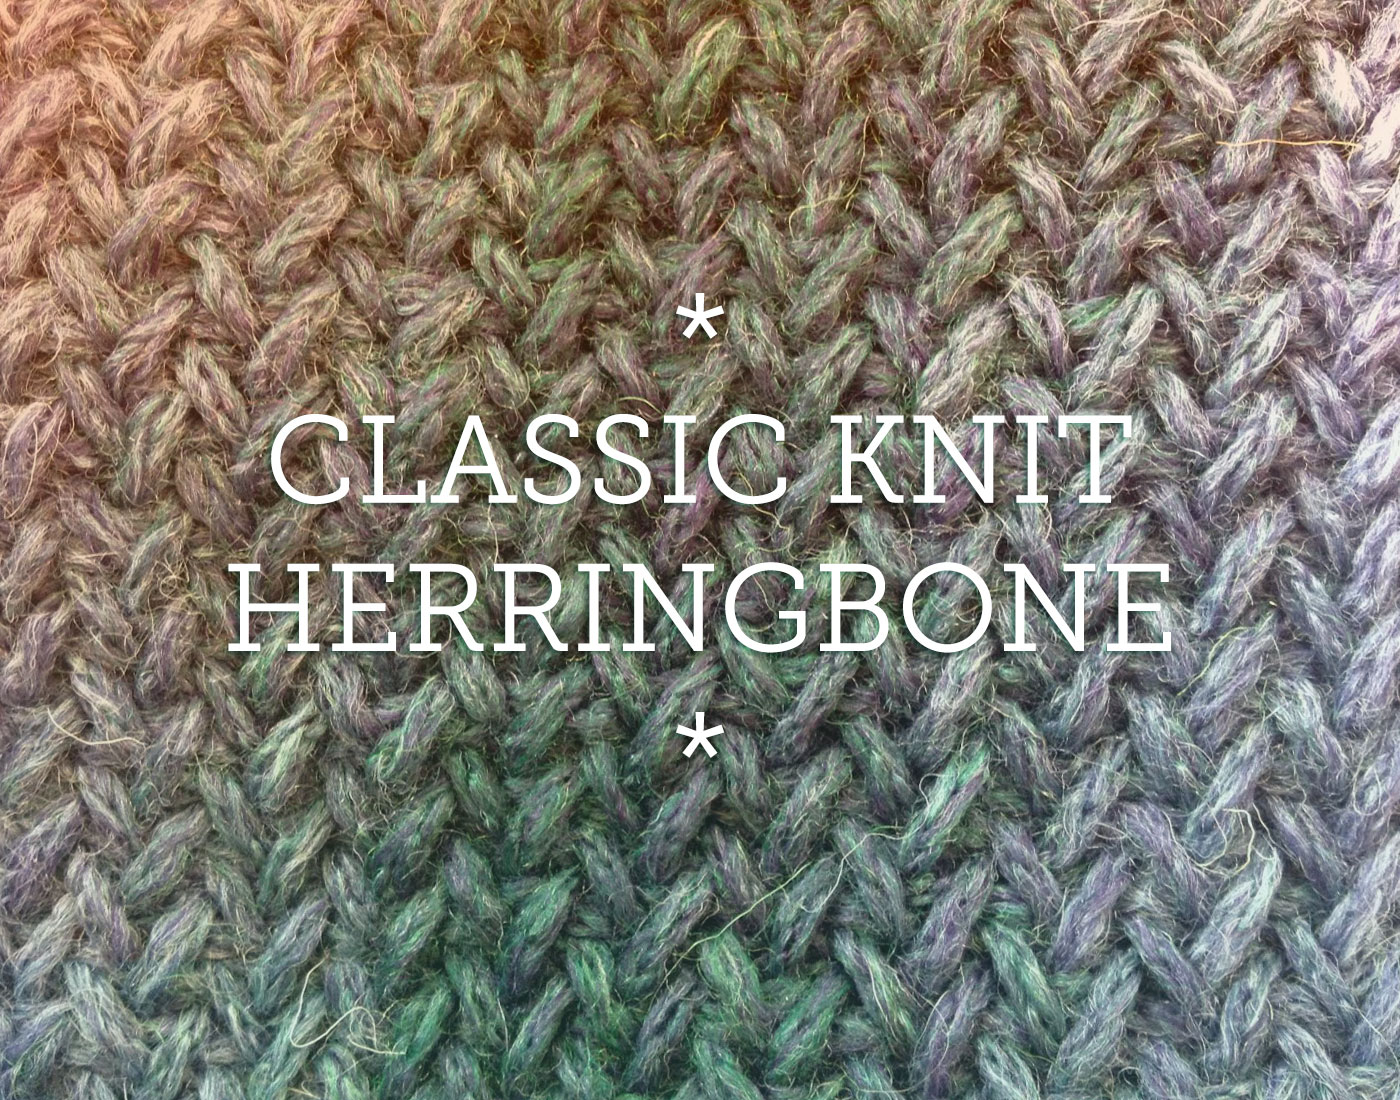 Pattern Knit Herringbone Knit Patterns For Scarves Cowls And Blankets